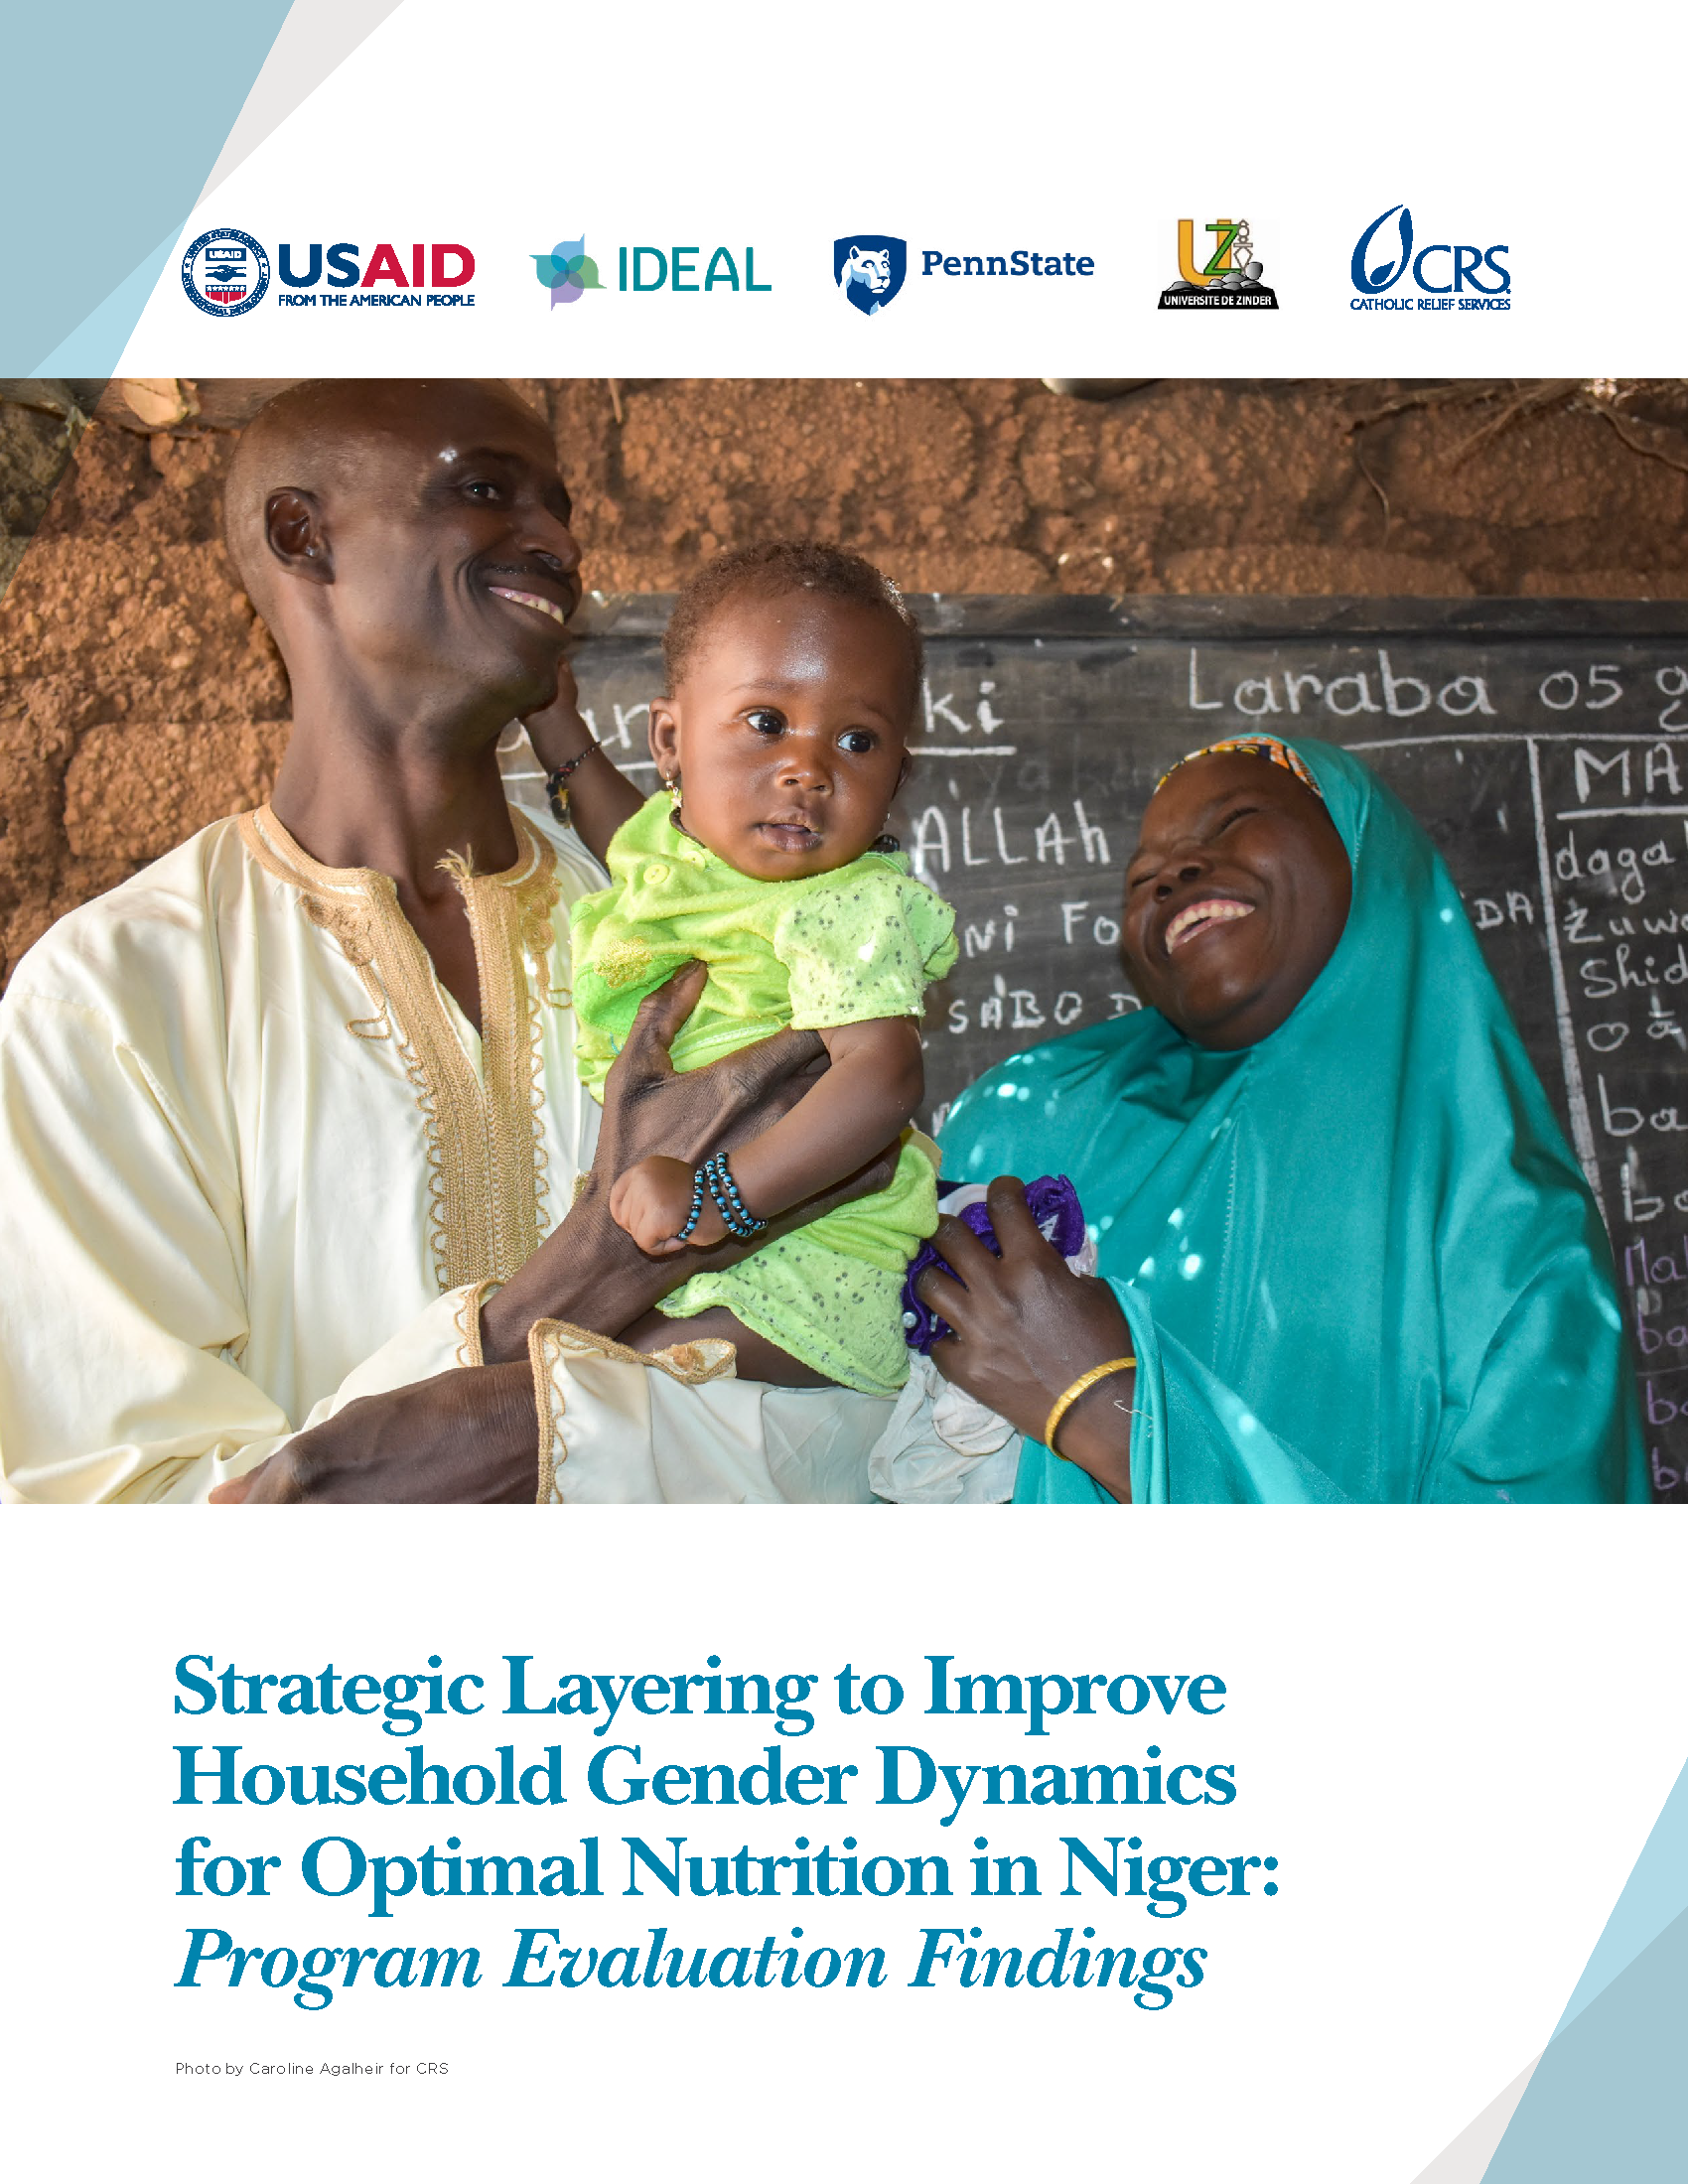 Strategic Layering to Improve Household Gender Dynamics for Optimal Nutrition in Niger: Program Evaluation Findings